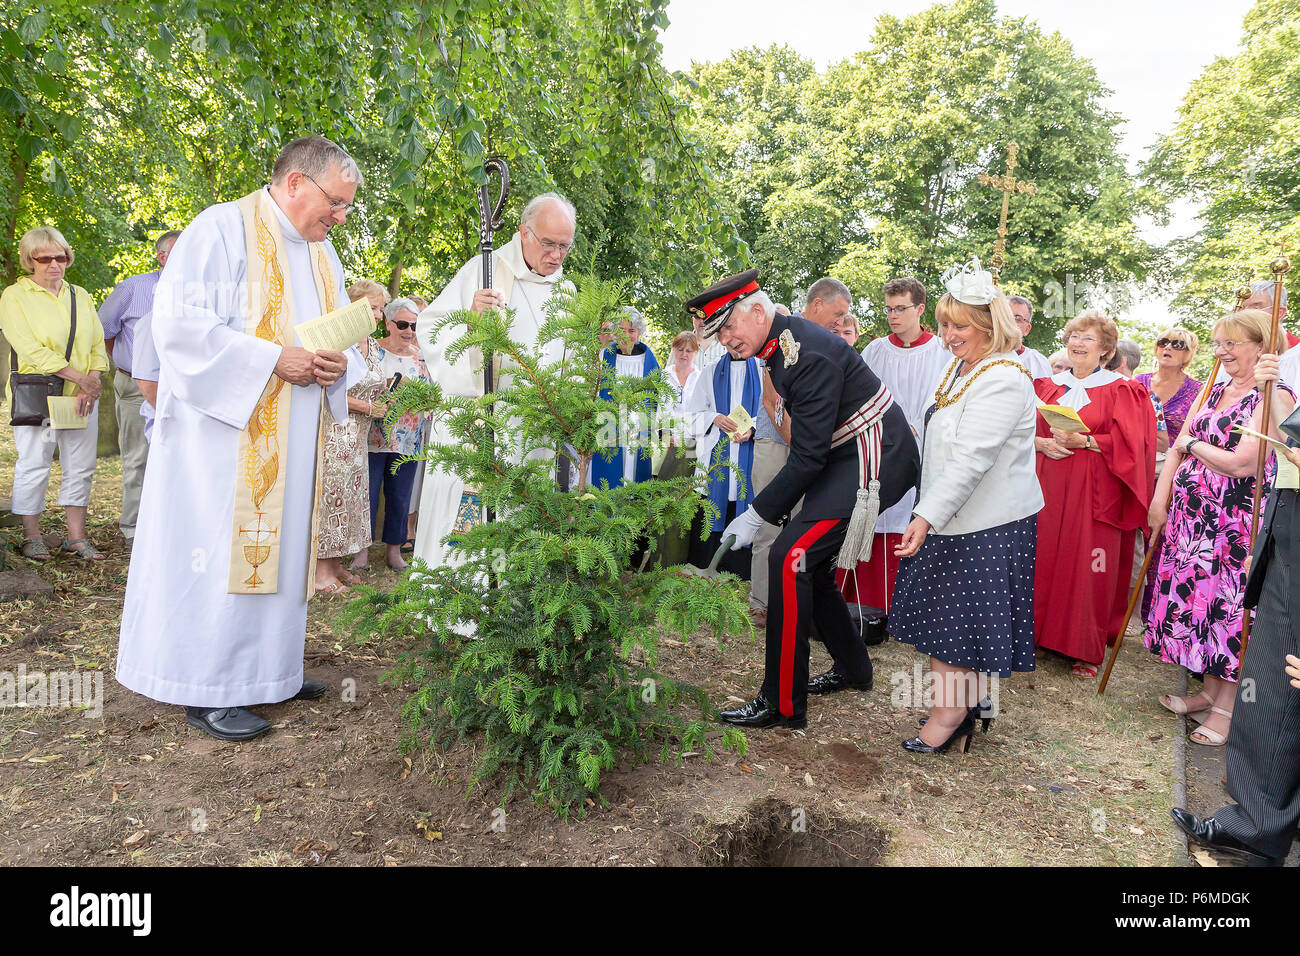 Warrington, UK. 01 July 2018 - The Finale of the Sunday service was taken outside of the church where a yew tree was planted by Cllr Karen Mundry, The Mayor of Warrington, and Thomas David Briggs, MBE, KstJ, Lord Lieutenant of Cheshire whilst the service and prayers were  held by Reverend Michael Ridley, Vicar of St Thomas' and the Rt Reverend Dr Peter Forster, Bishop of Chester Credit: John Hopkins/Alamy Live News Stock Photo